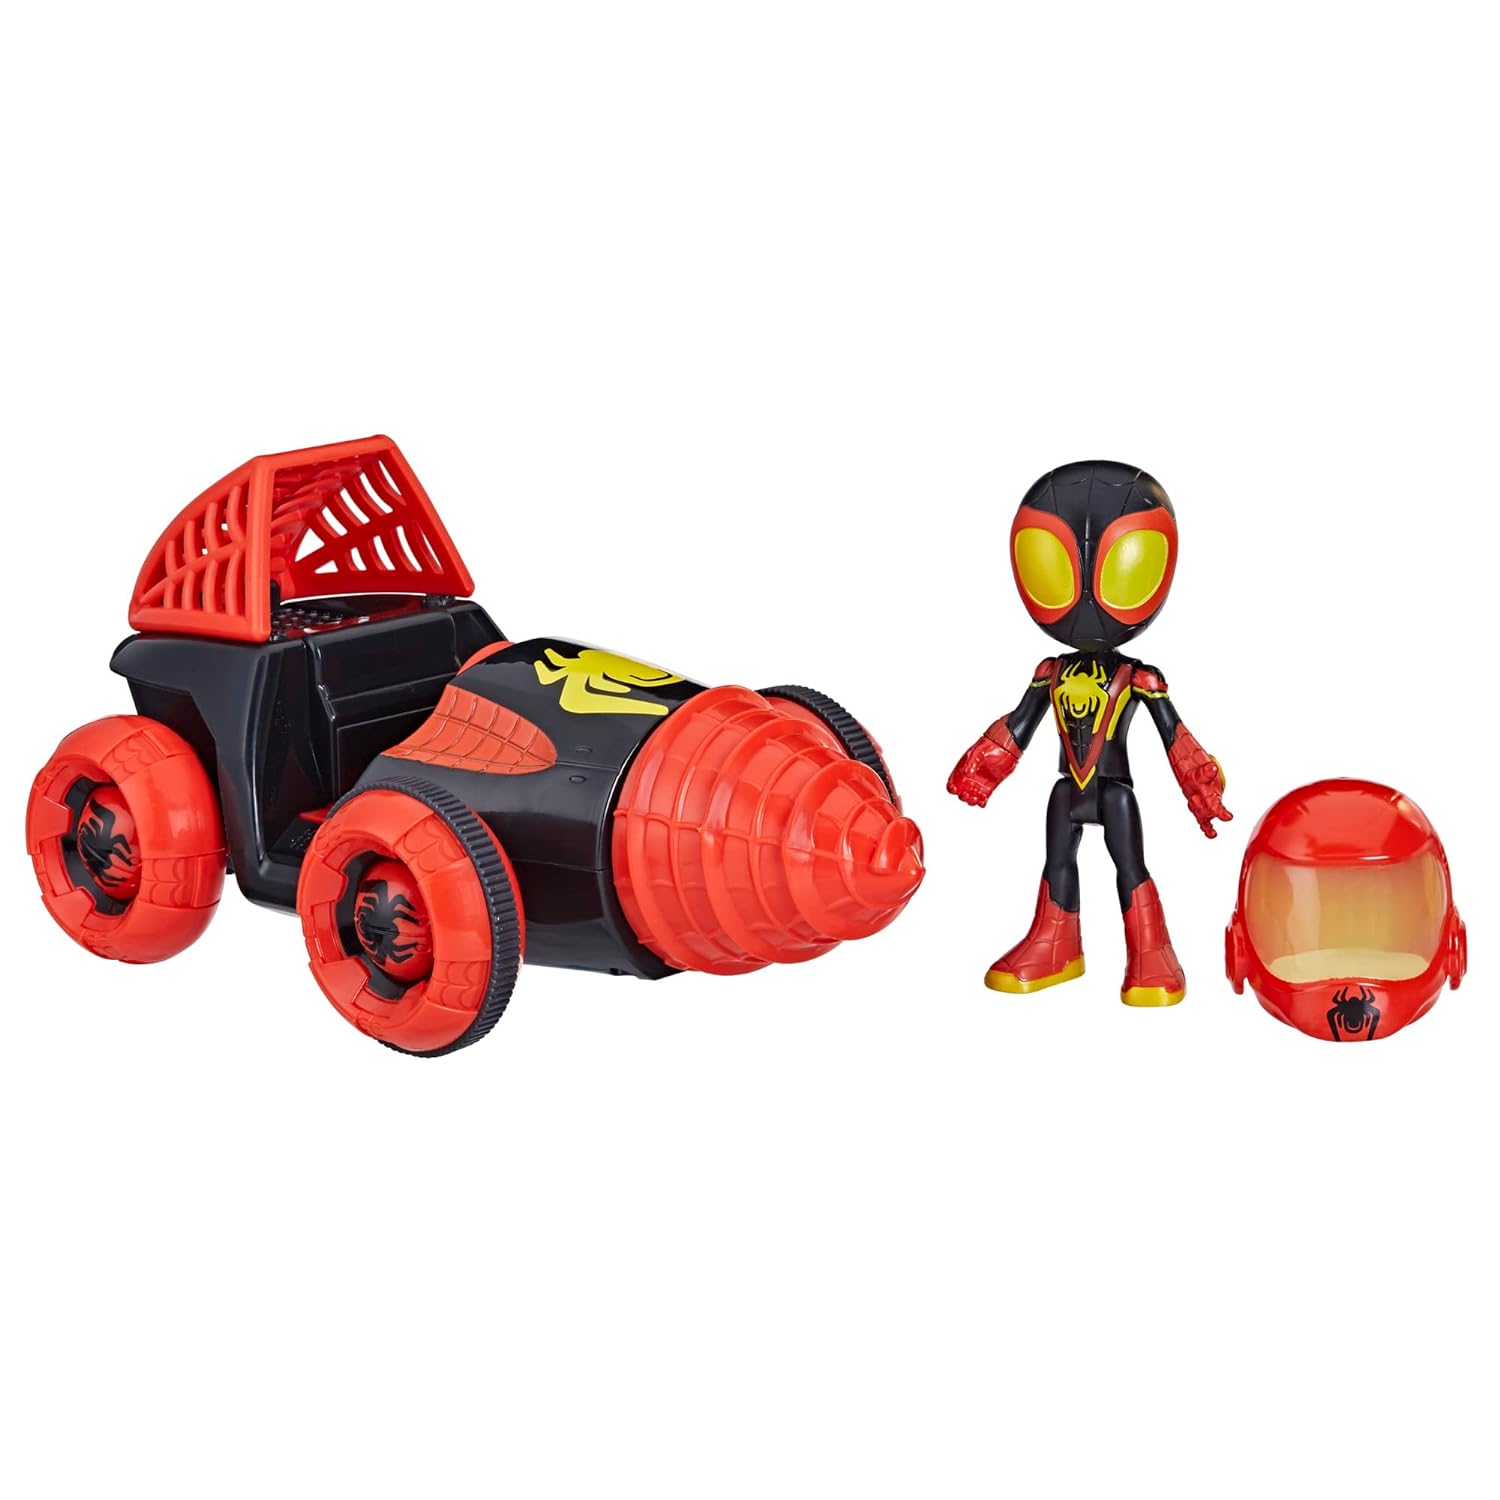 Hasbro Marvel Spidey and His Amazing Friends Web-Spinners Miles with Drill Spinner, Car Playset with Vehicle, 4-Inch Scale Acti…